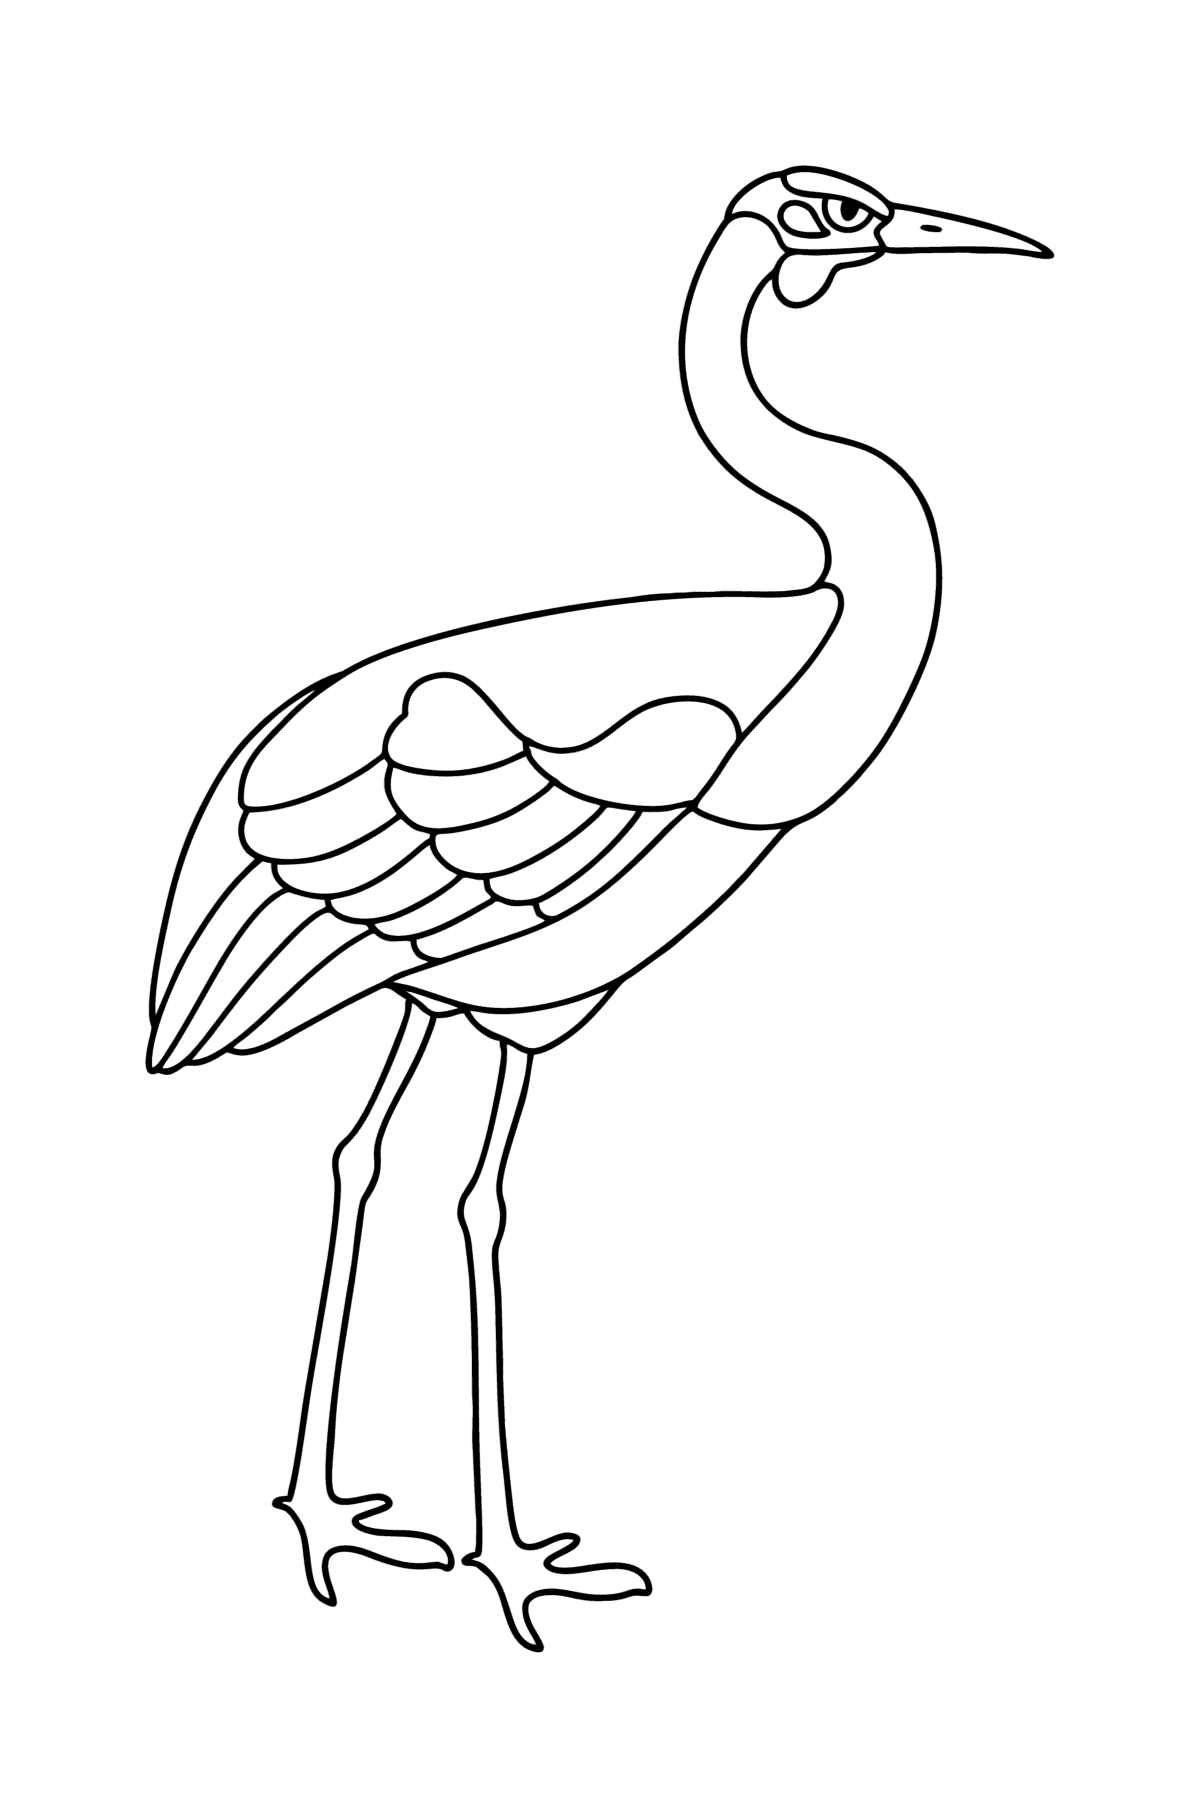 Brolga bird сolouring page - Coloring Pages for Kids